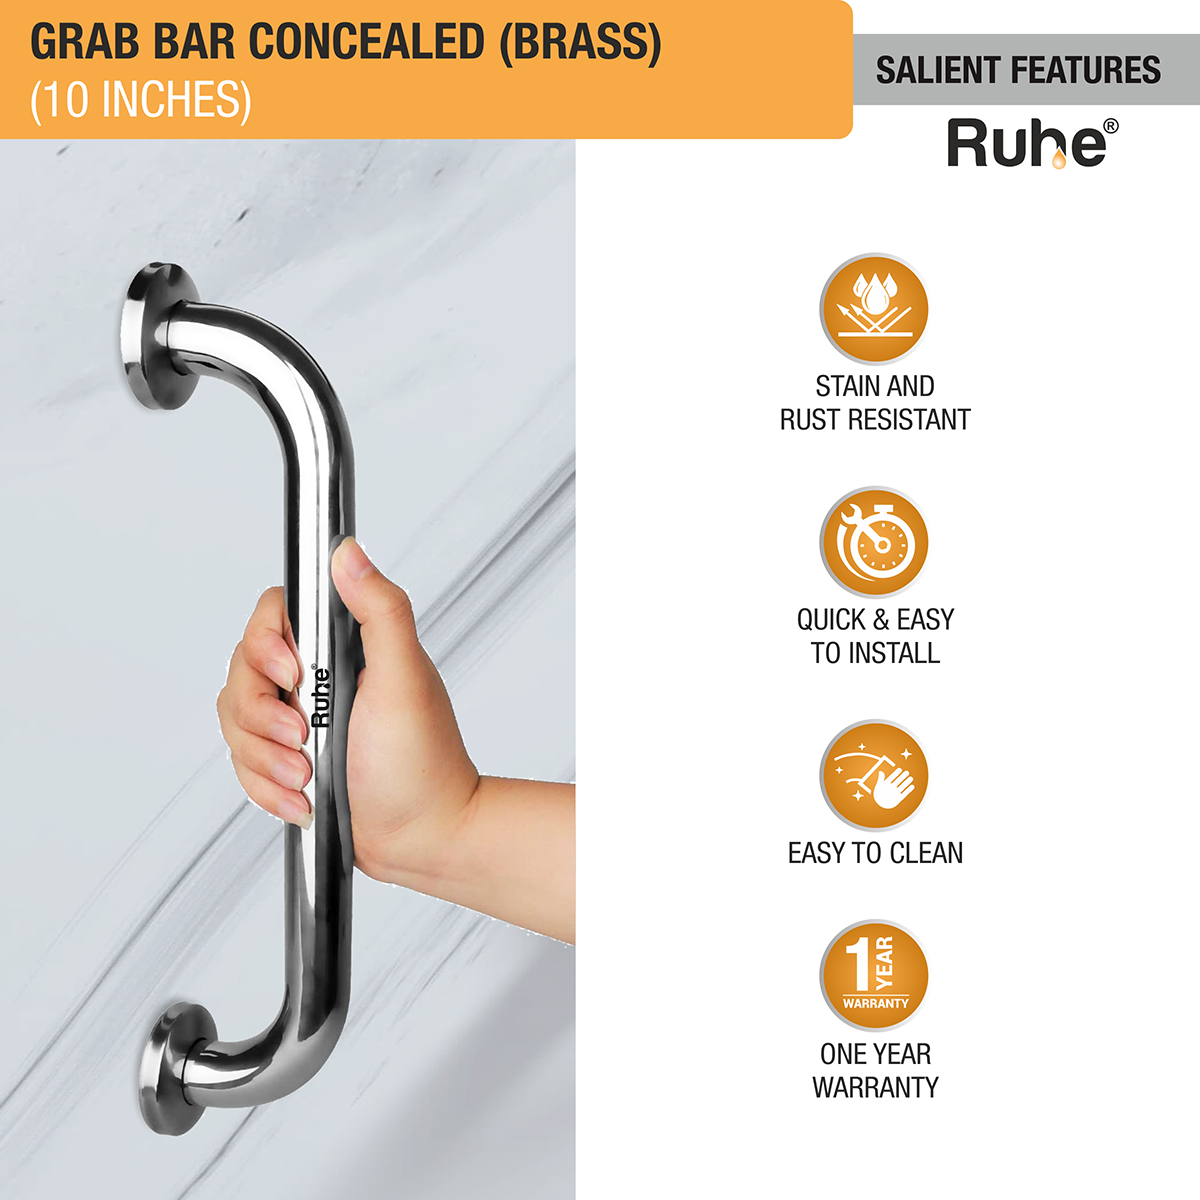 Brass Grab Bar Concealed (10 inches) features and benefits